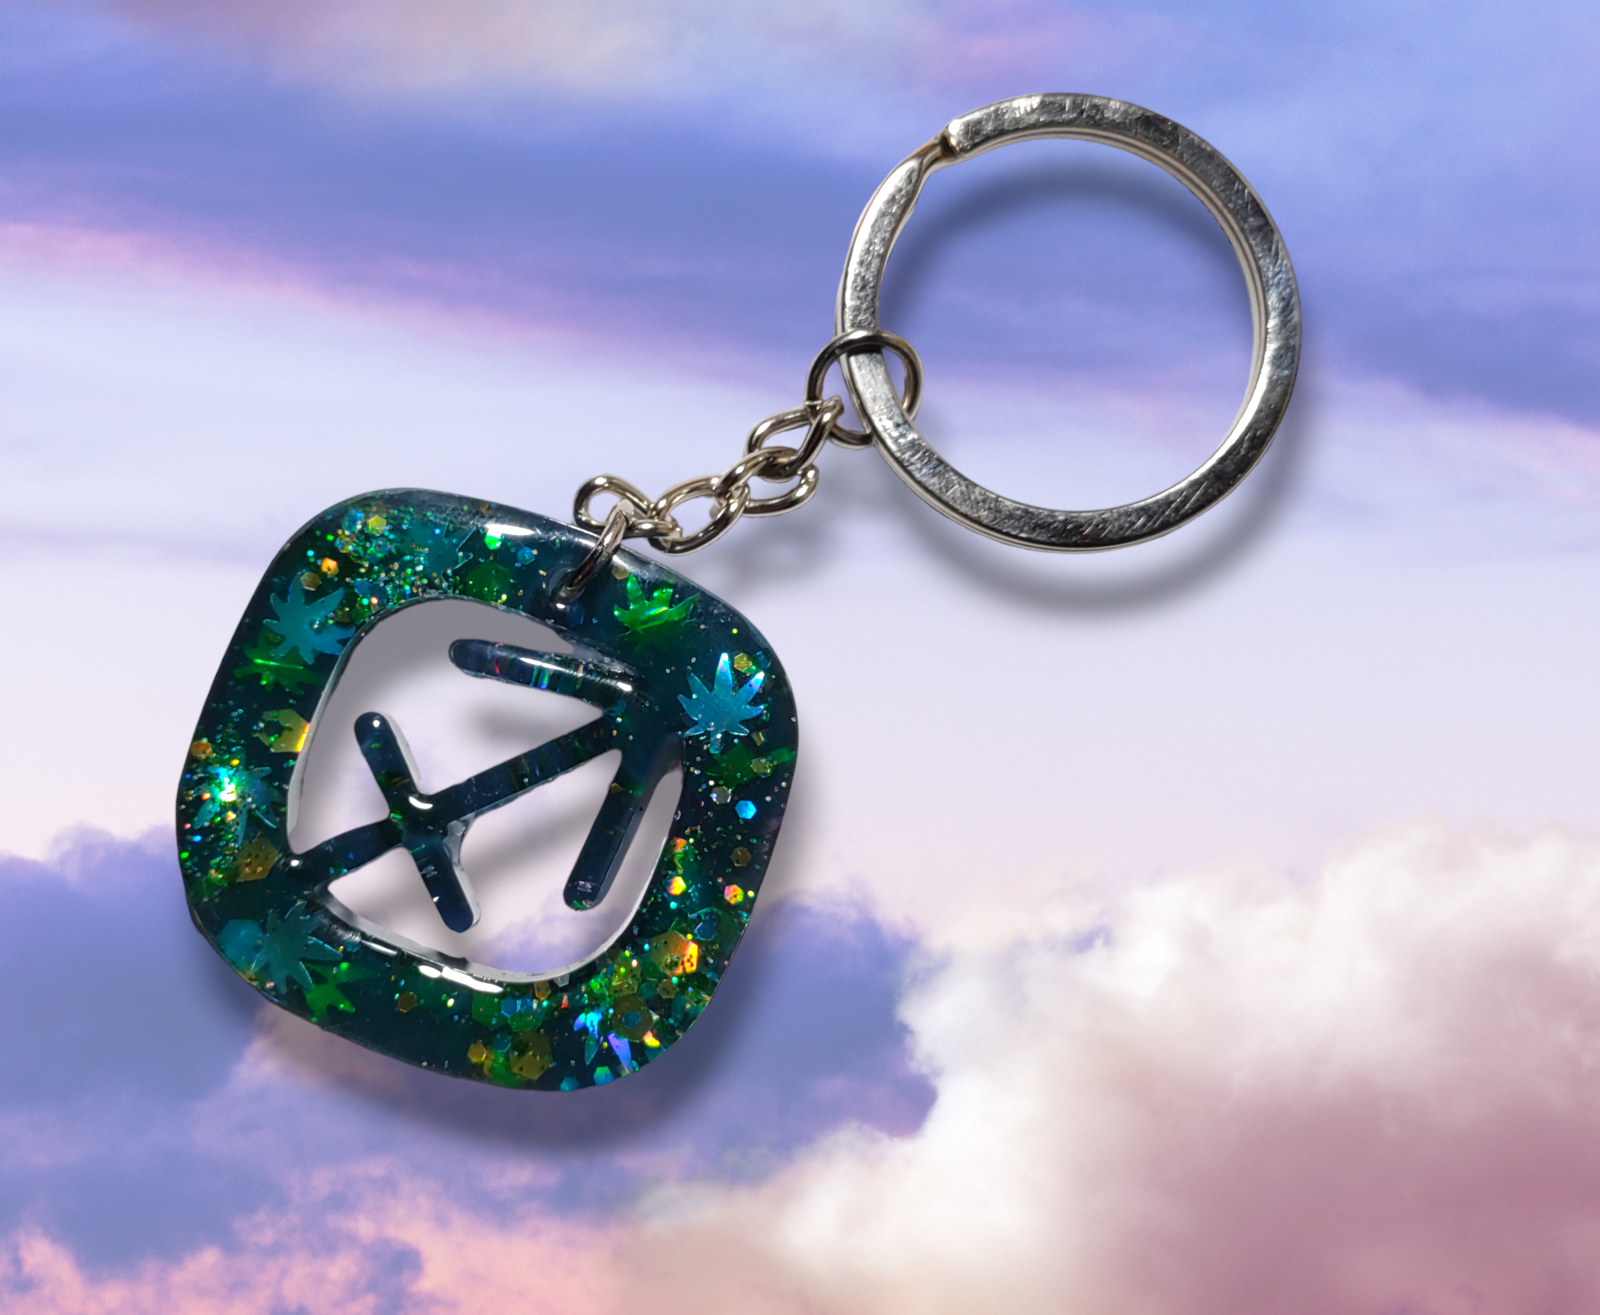 420 Horoscope Keychains earrings from Karma Goodness Designs